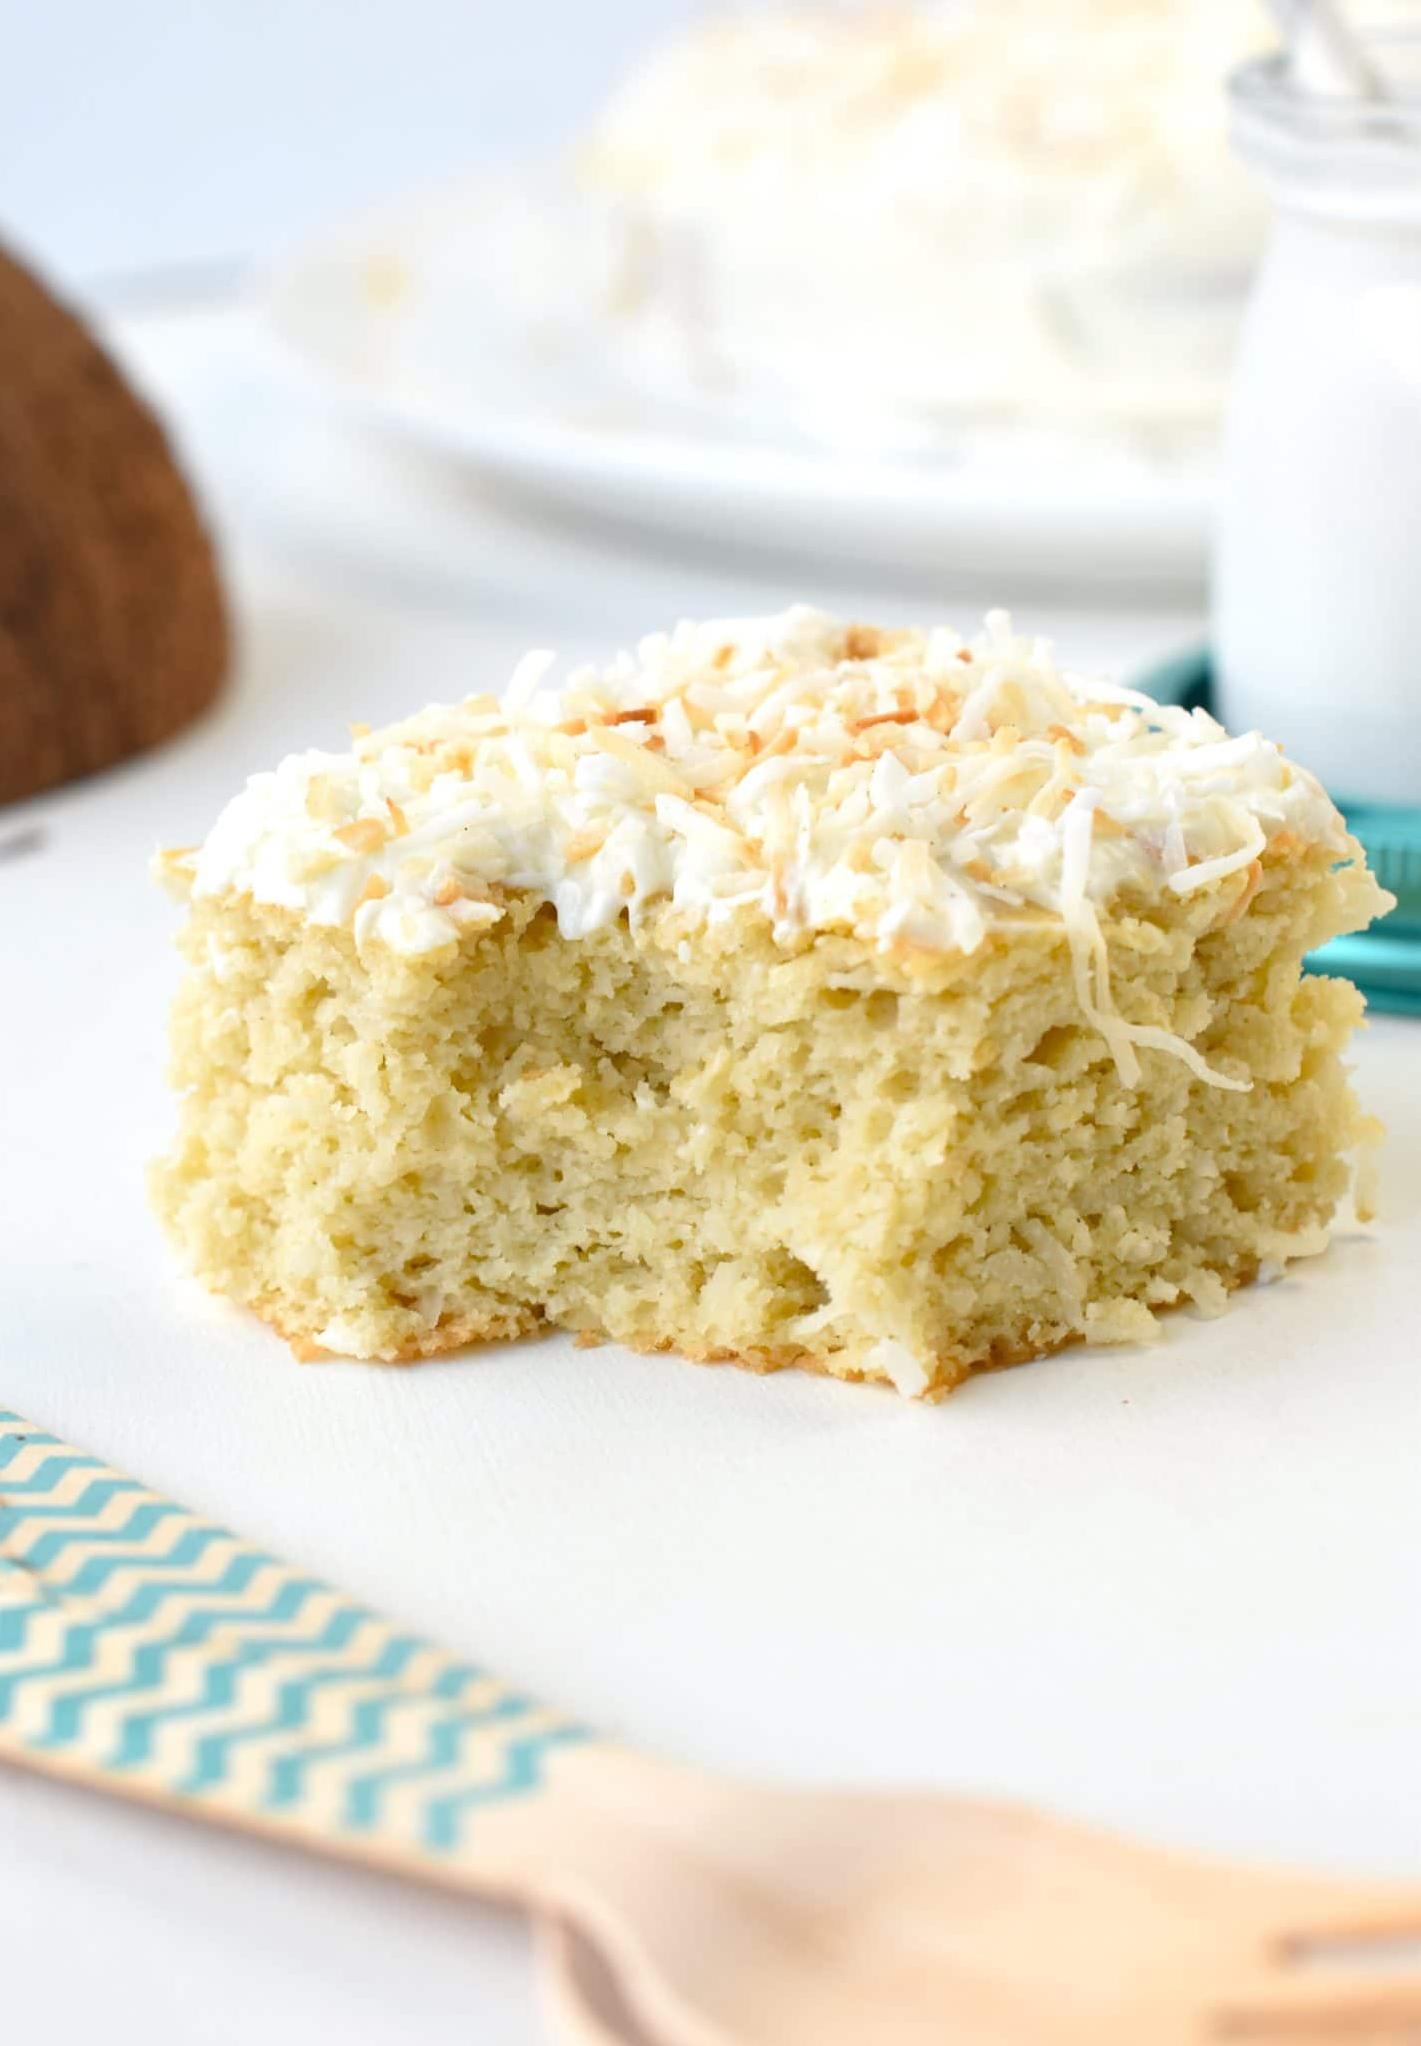  Add a pop of color to your dessert table with this coconut cake